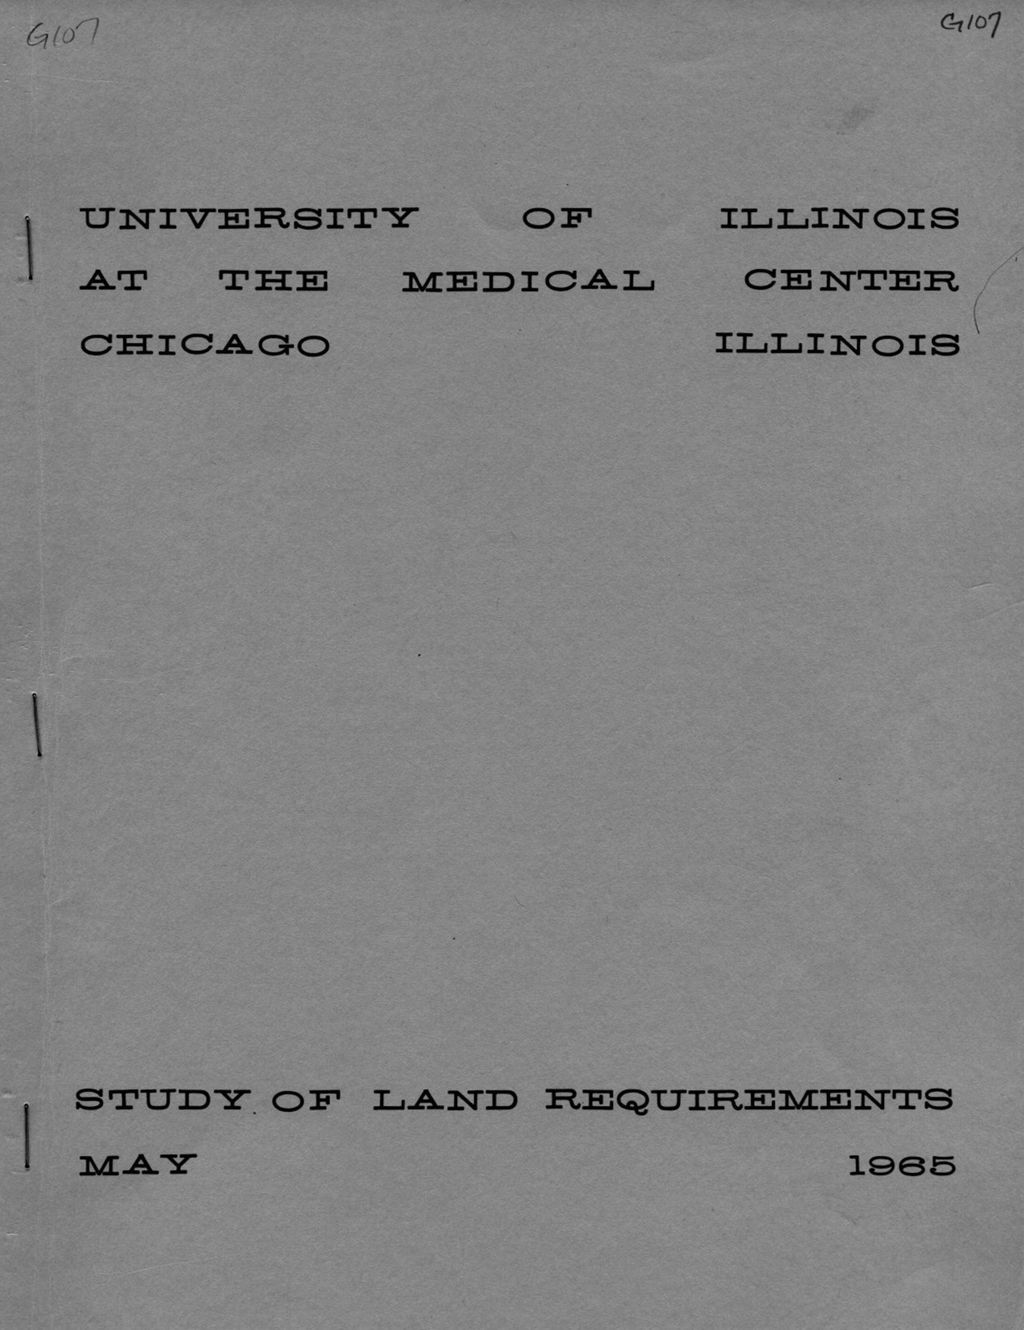 Study of Land Requirements, University of Illinois at the Medical Center